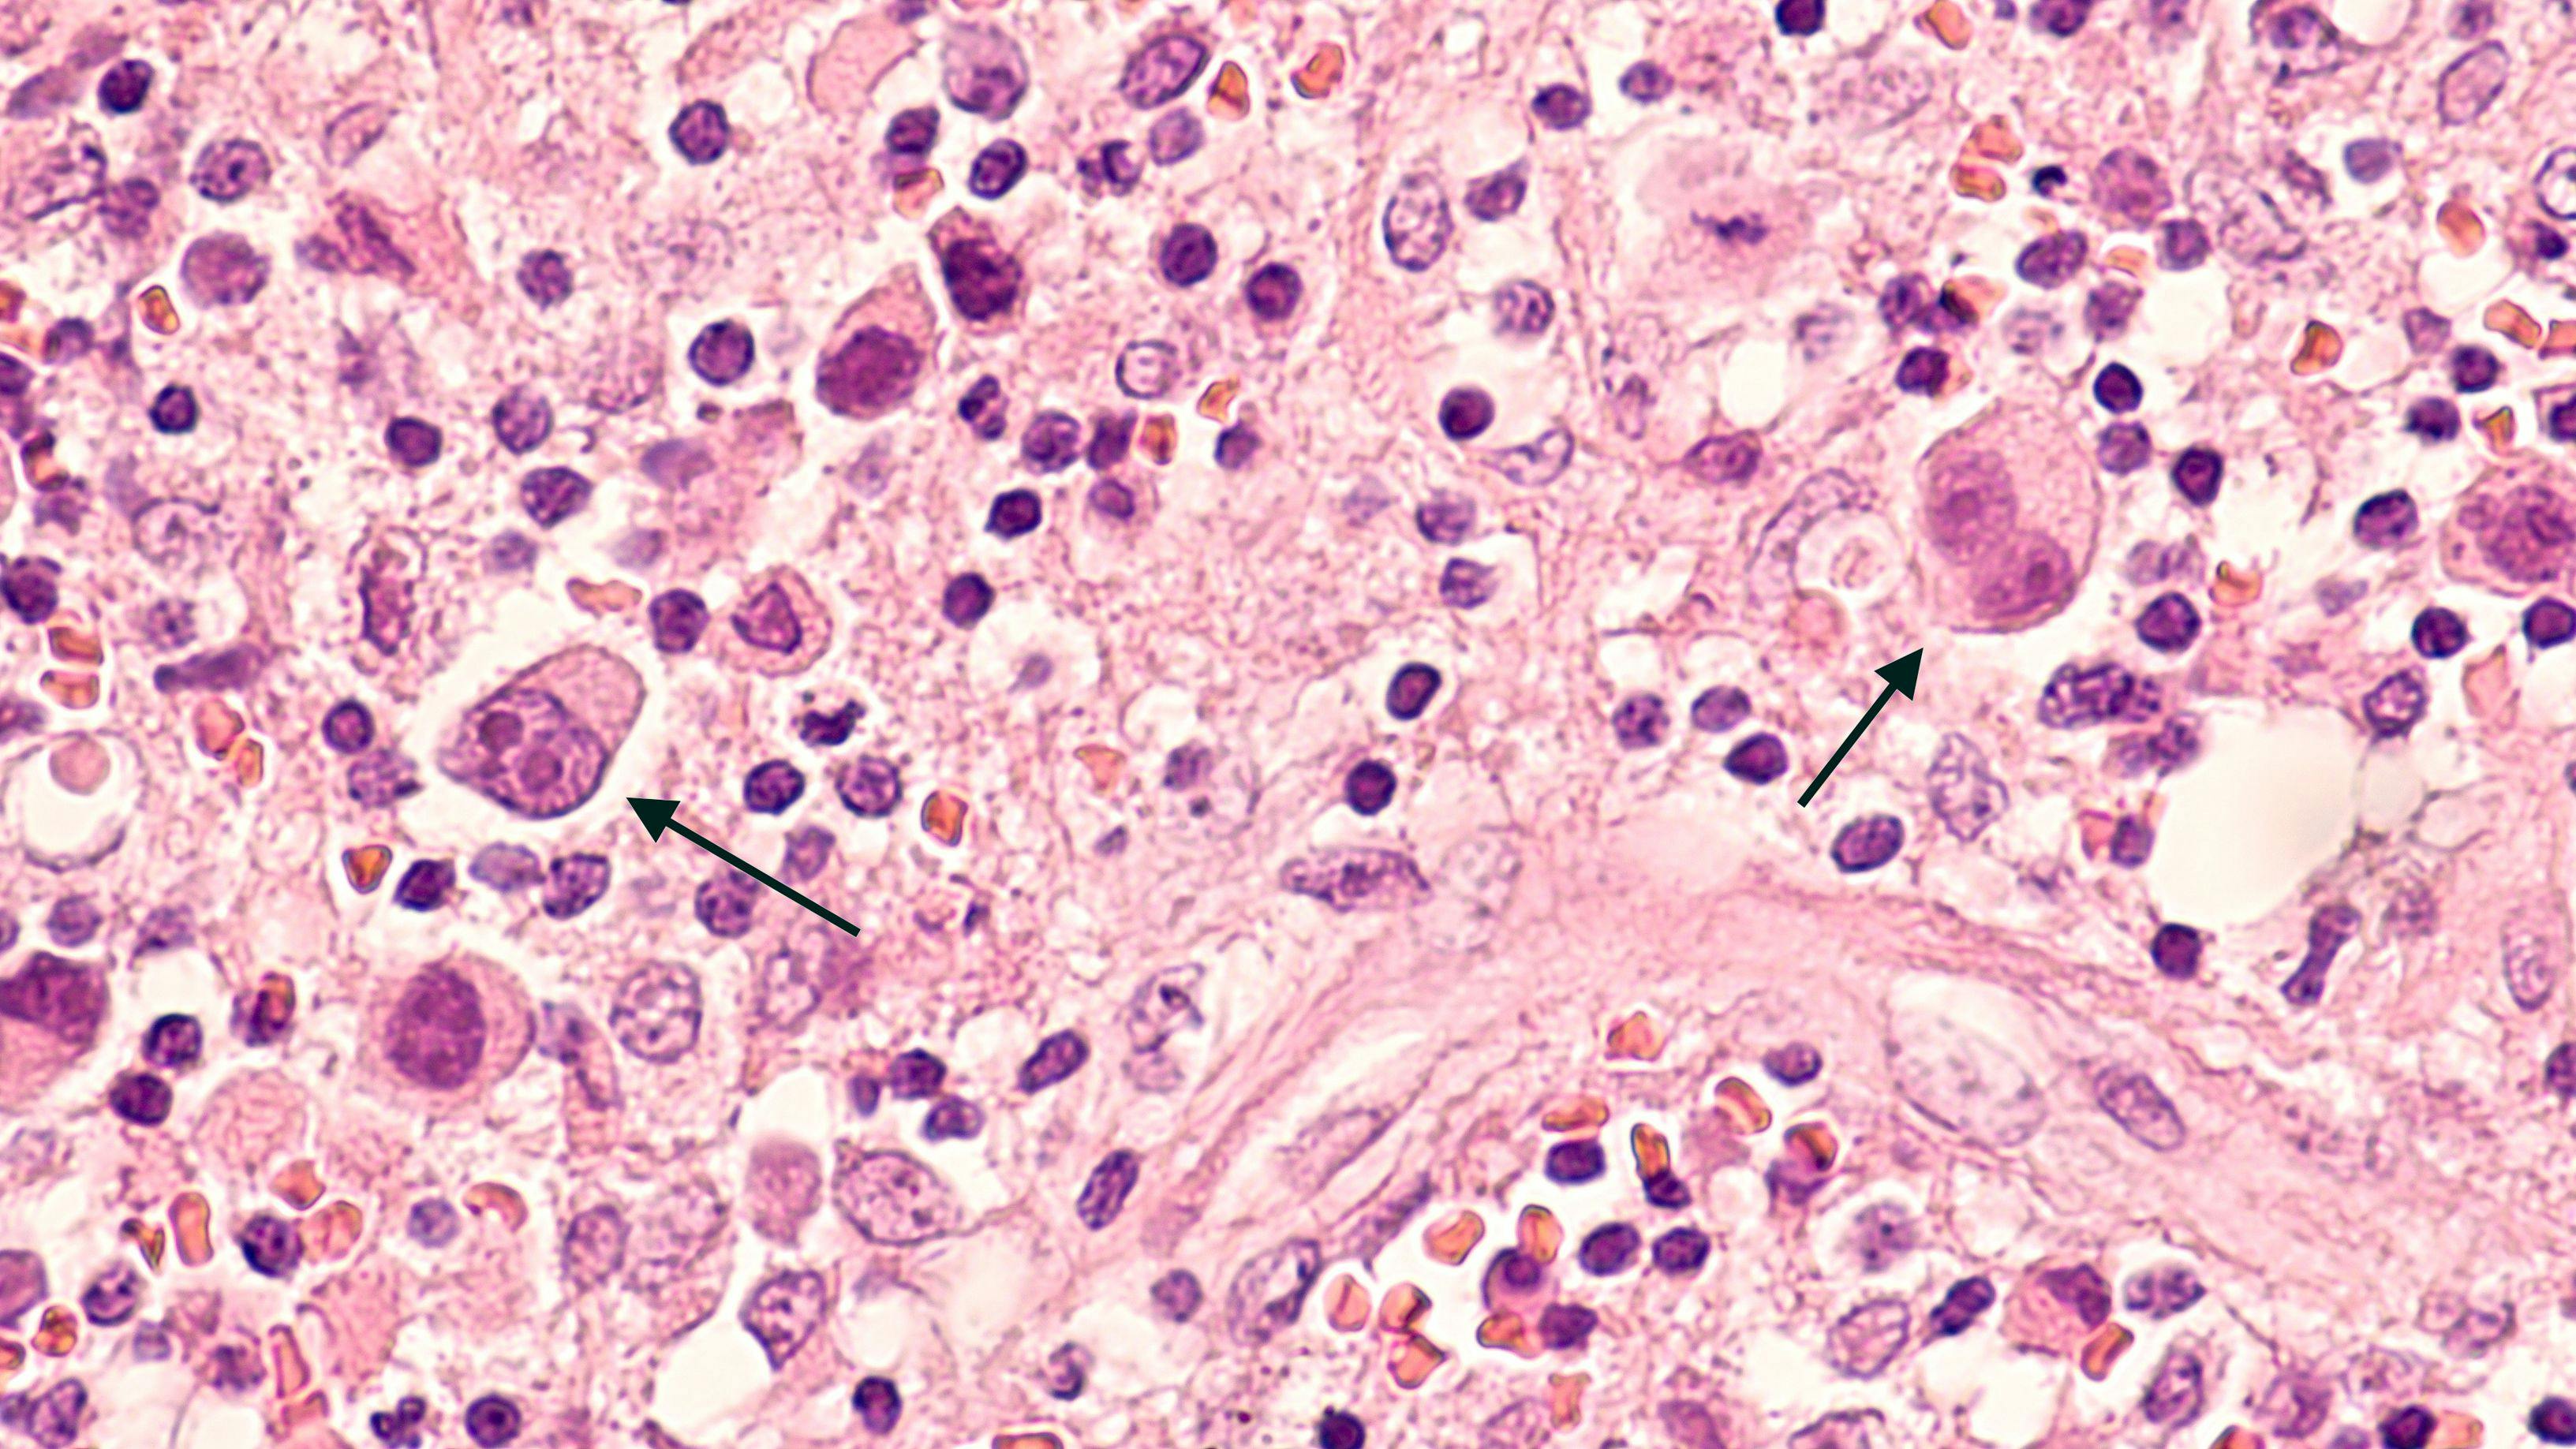 Microscopic image of a lymph node in a patient with Hodgkin's Disease (lymphoma), showing two Reed Sternberg cells in the same field. | Image Credit: © David A Litman - www.stock.adobe.com